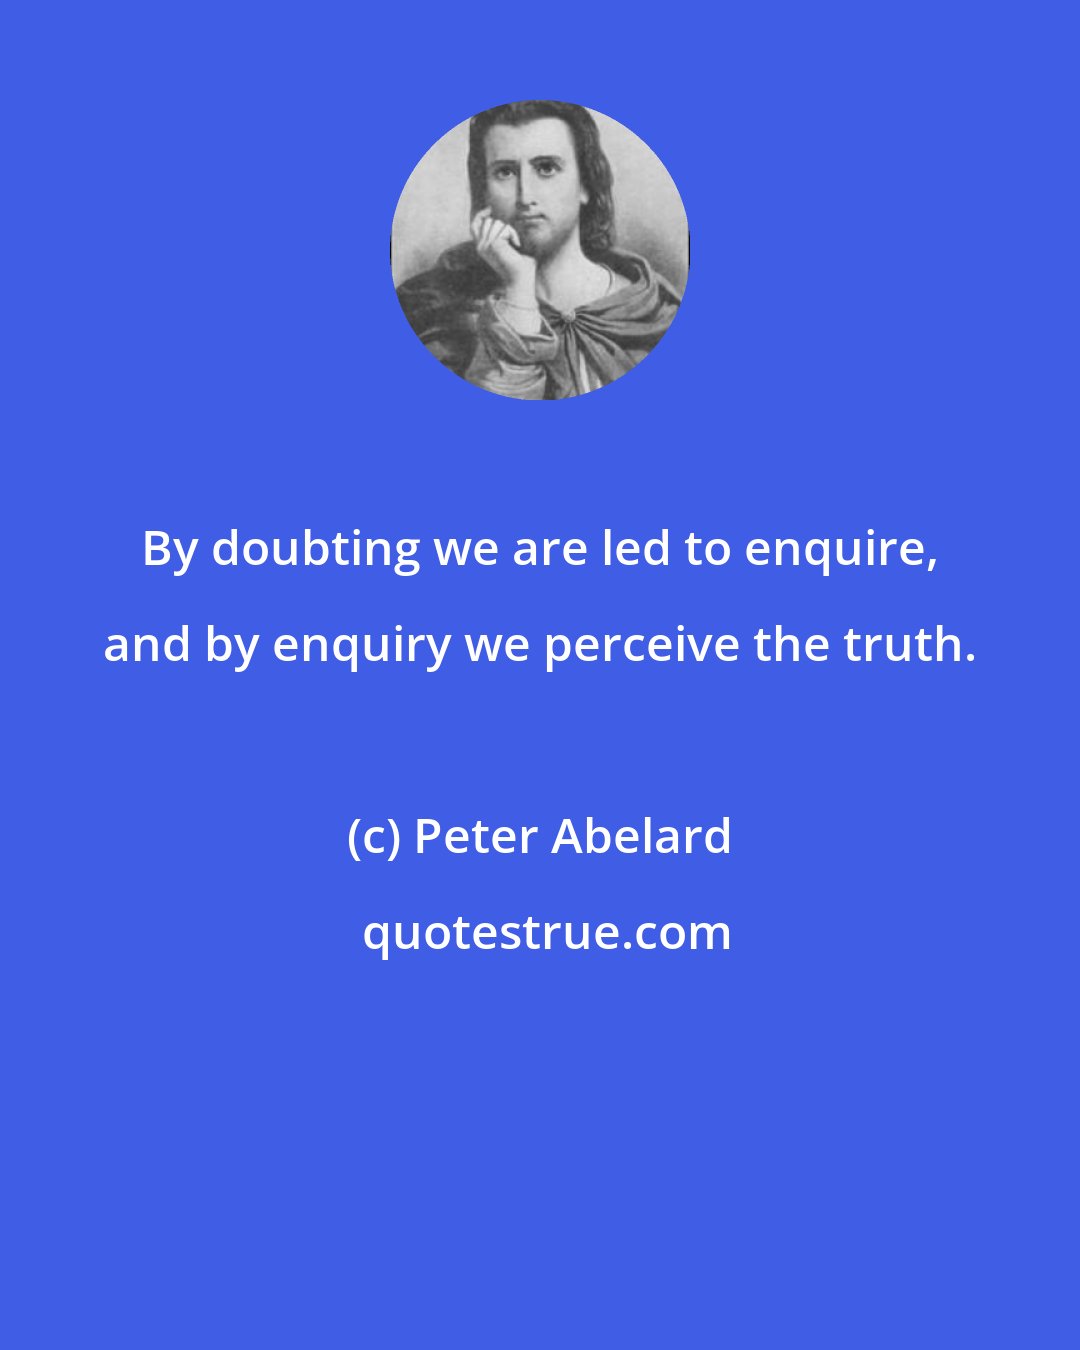 Peter Abelard: By doubting we are led to enquire, and by enquiry we perceive the truth.